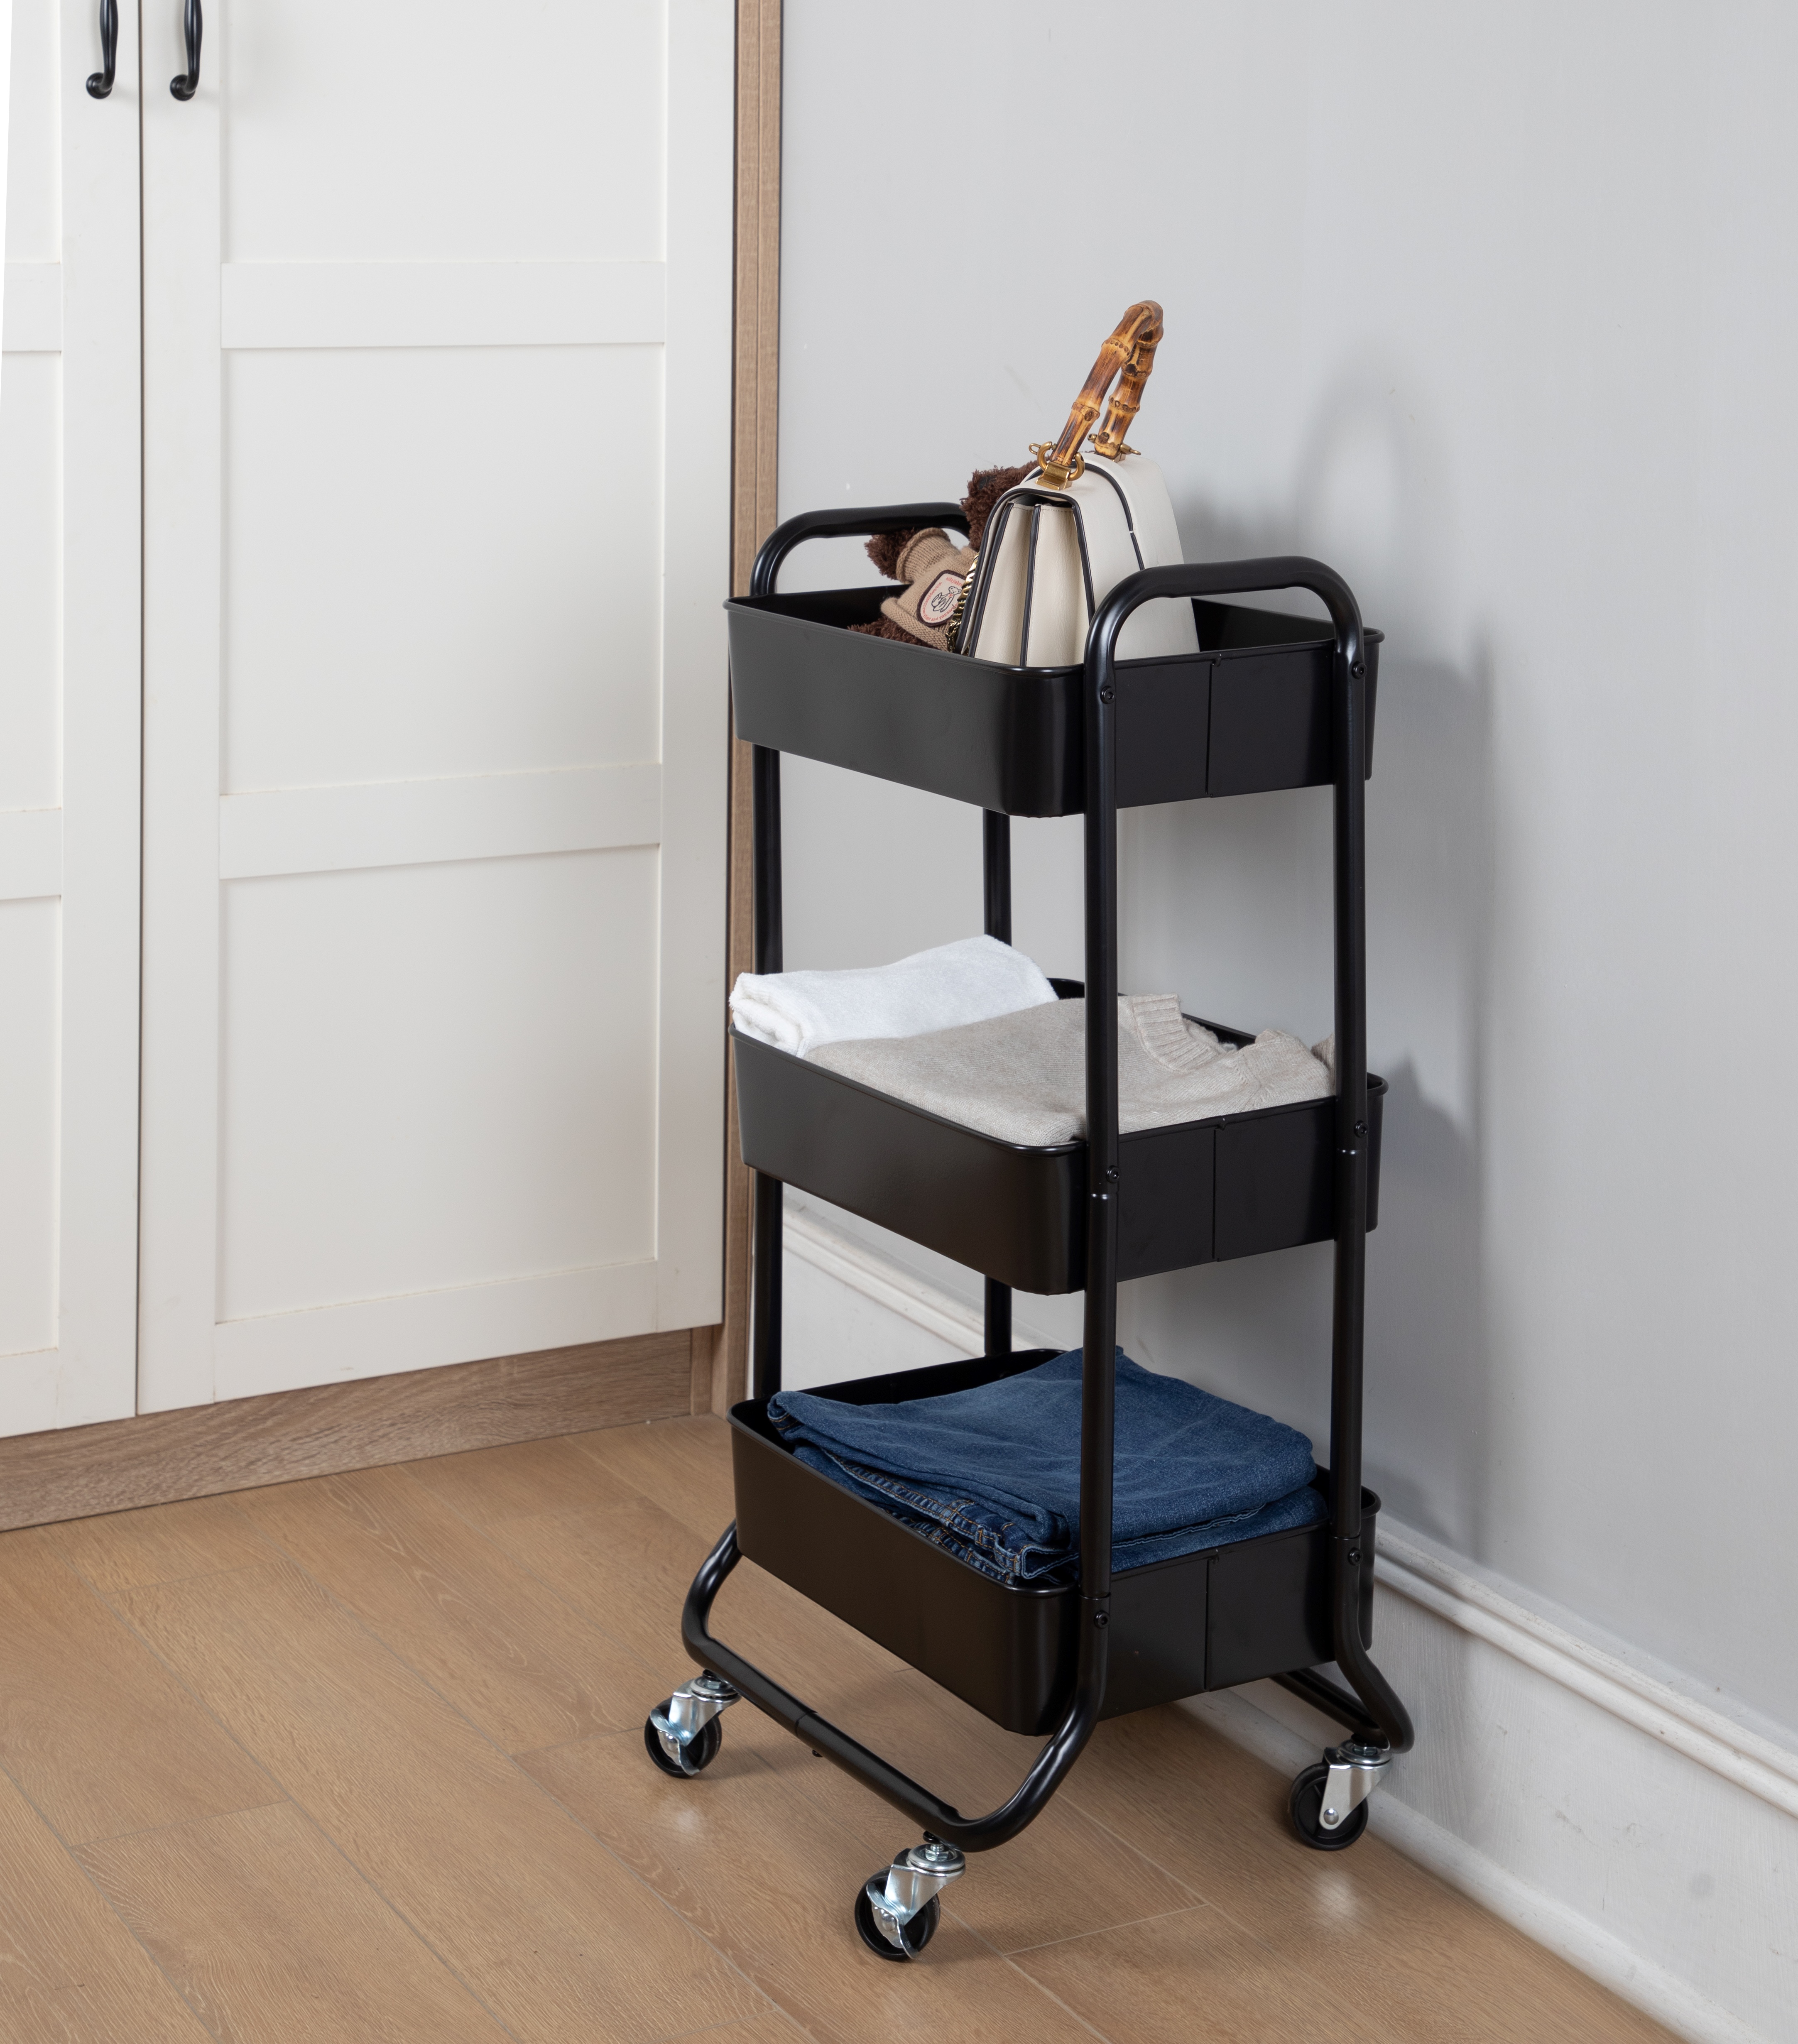 Mainstays 3 Tier Metal Utility Cart Rich Black,  Laundry Baskets, Powder Coating,  Adult and Child - image 2 of 6